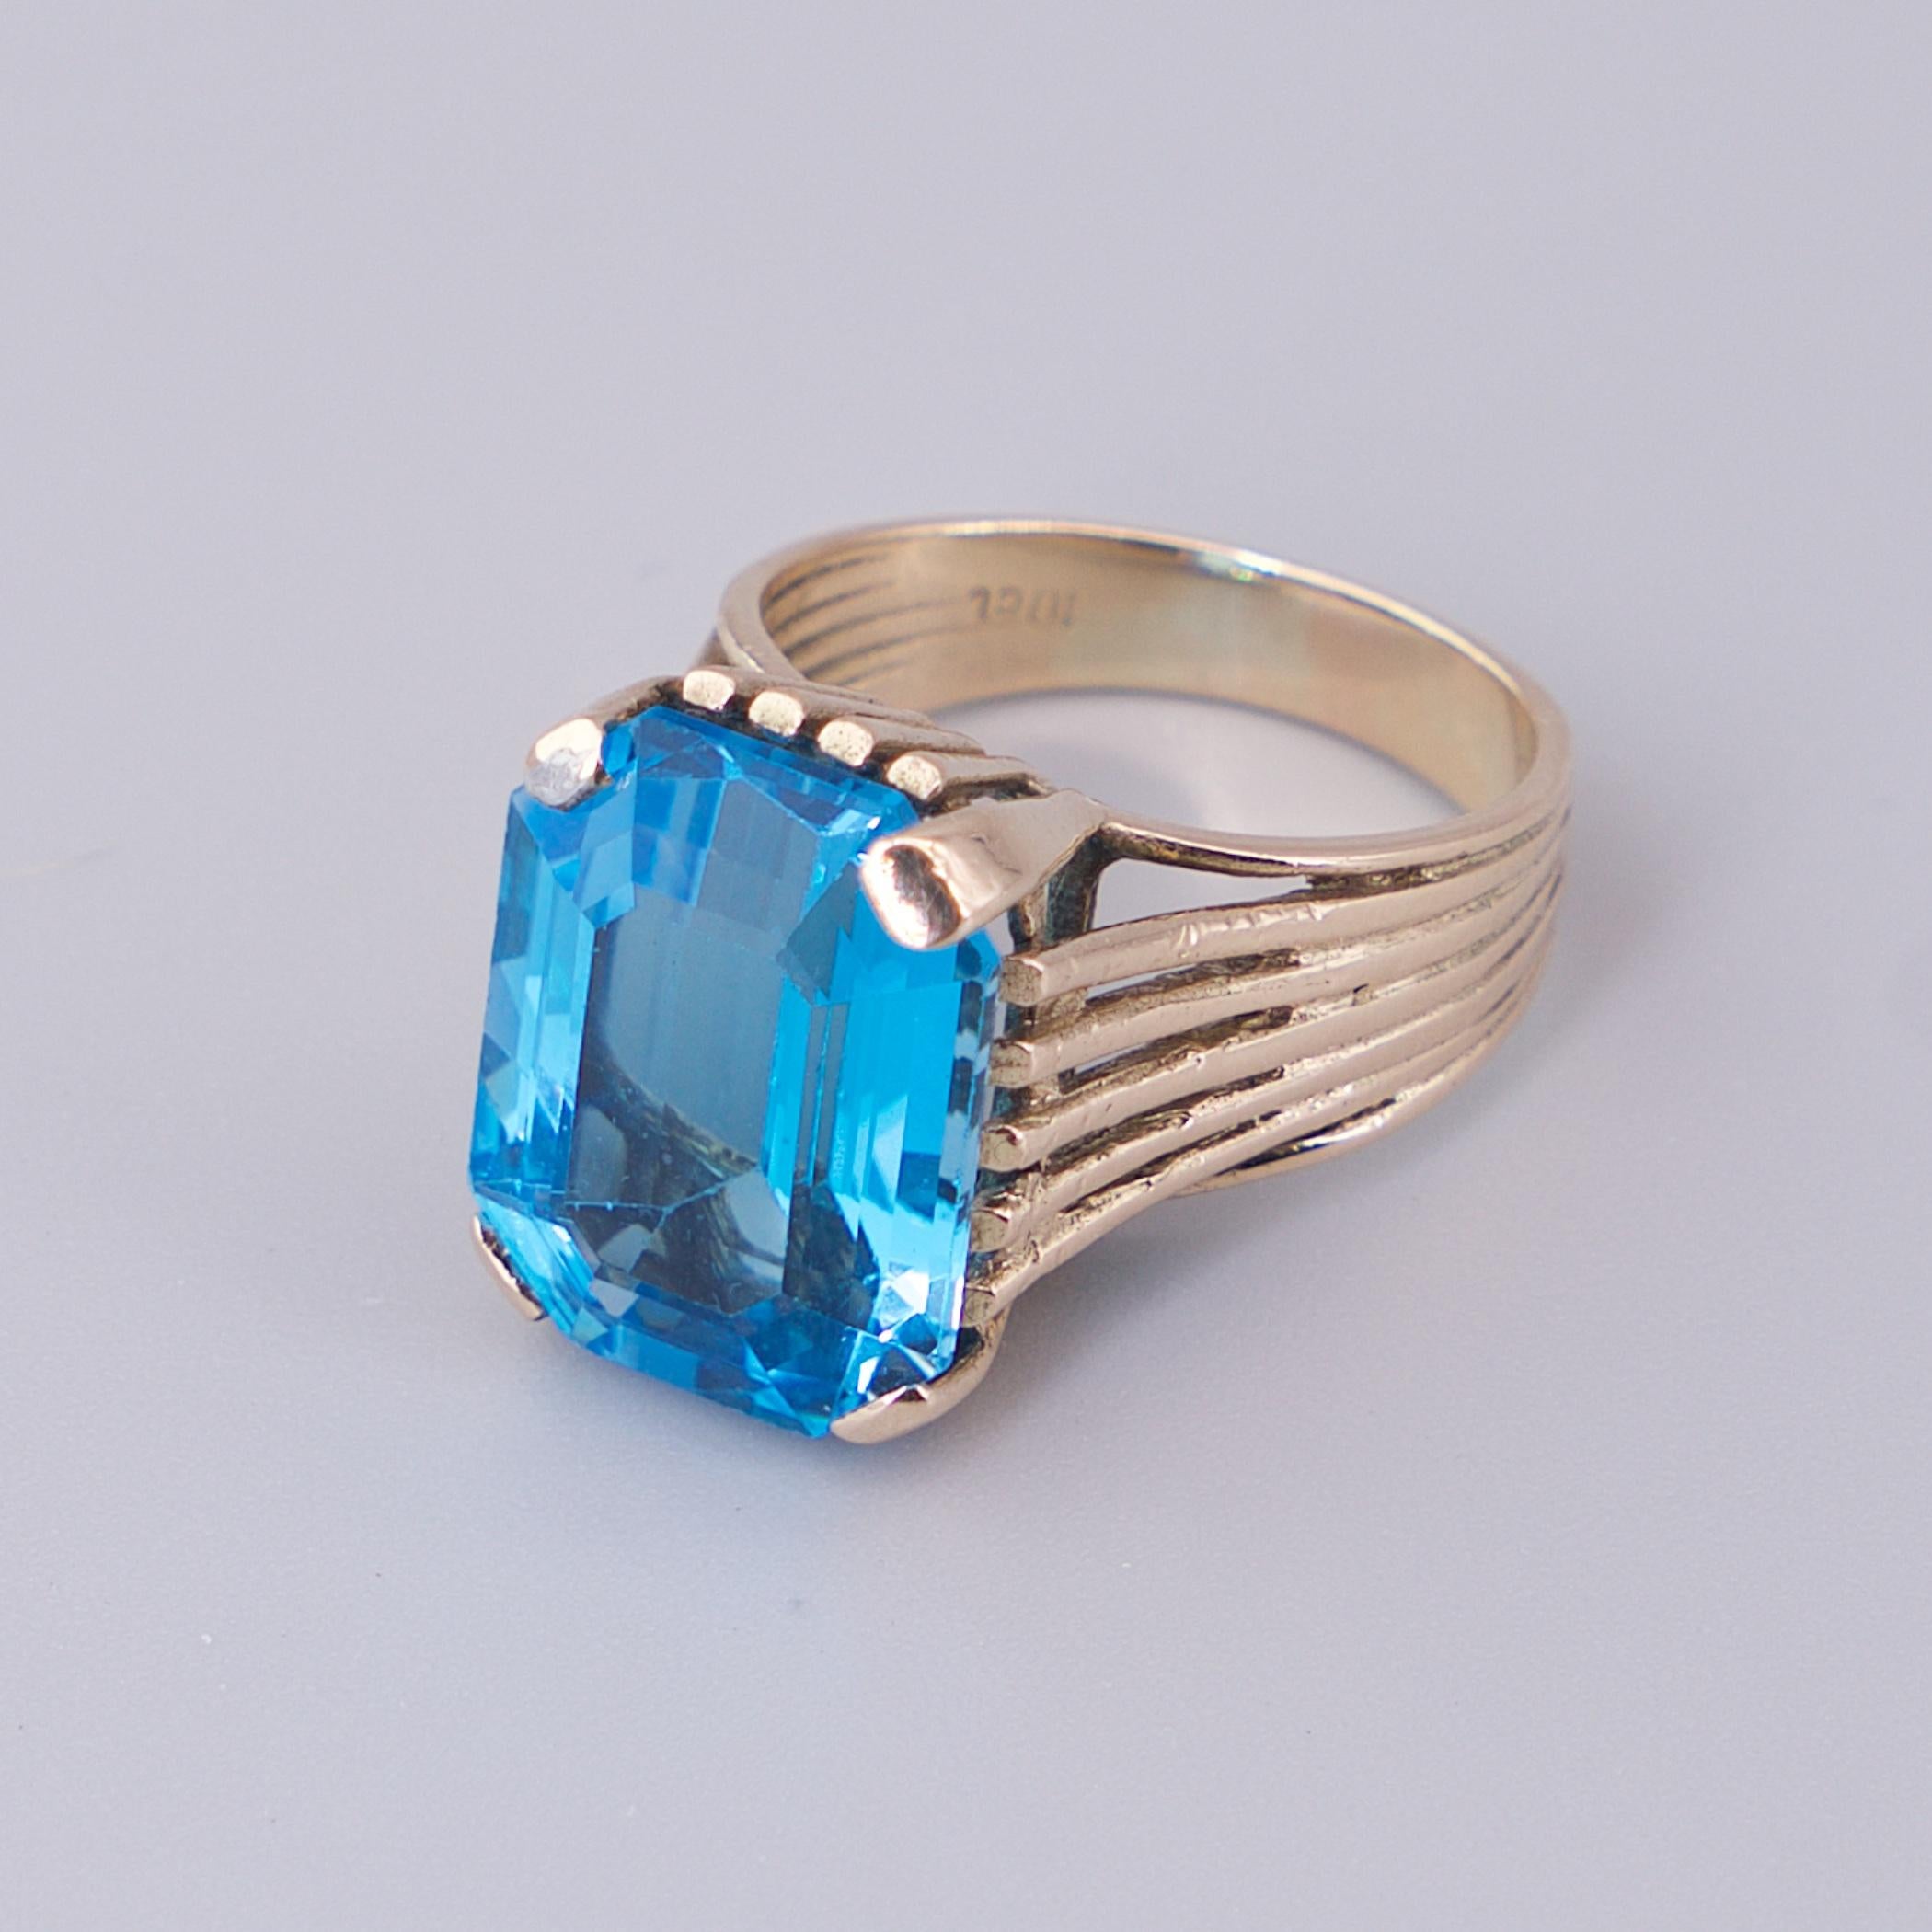 Mid-Century Topaz Cocktail Ring 10k Gold with Empire Art Deco In Fair Condition For Sale In Hyattsville, MD